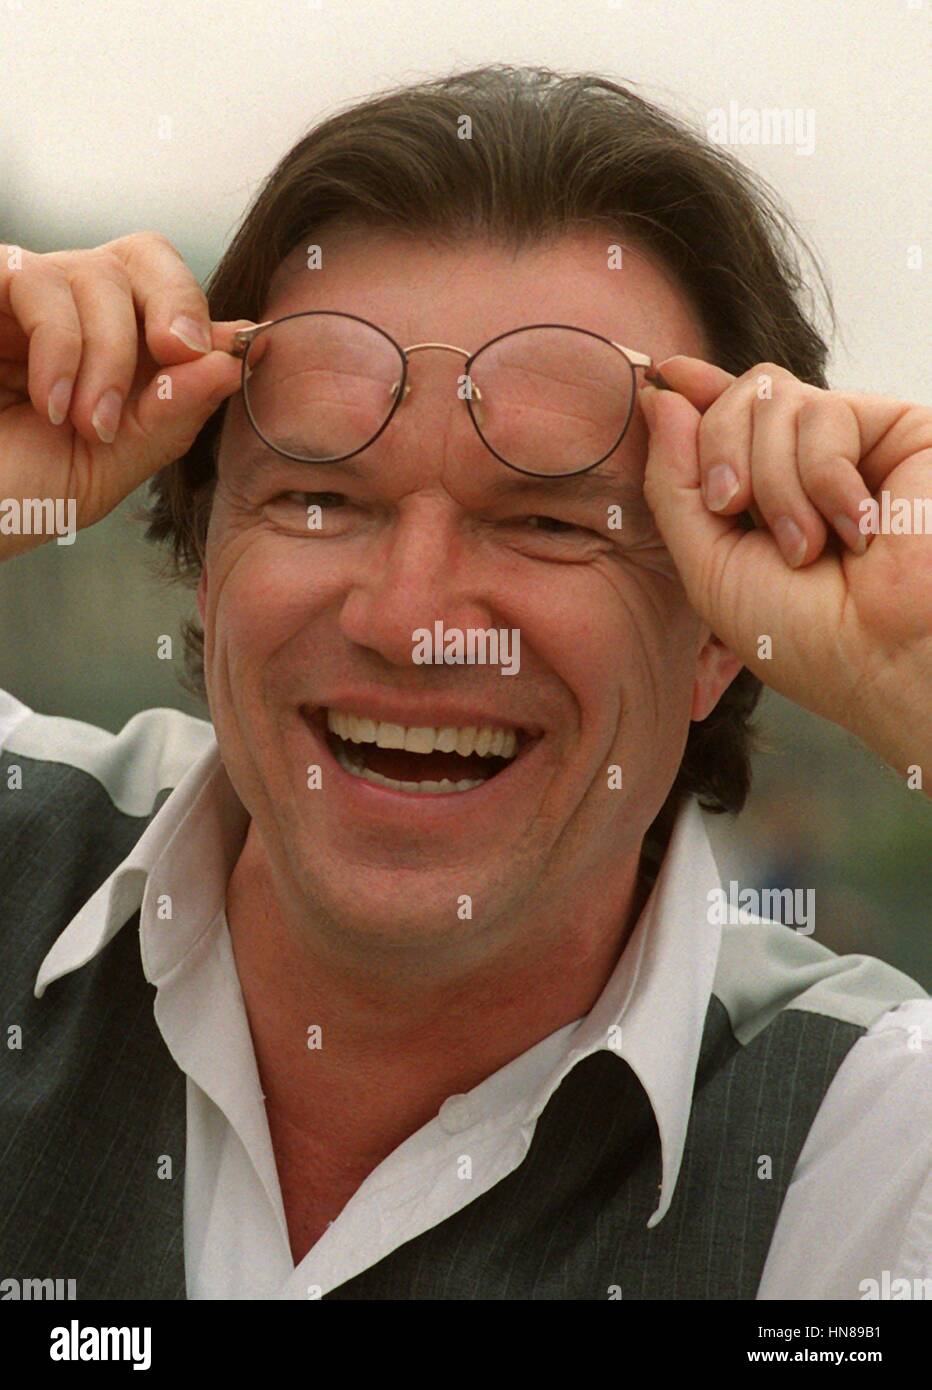 ARCHIVE - German TV presenter Wolfgang Lippert at a press conference in Dresden, Germany, 10 May 1999. Photo: Matthias Hiekel/Zentralbild/dpa Stock Photo